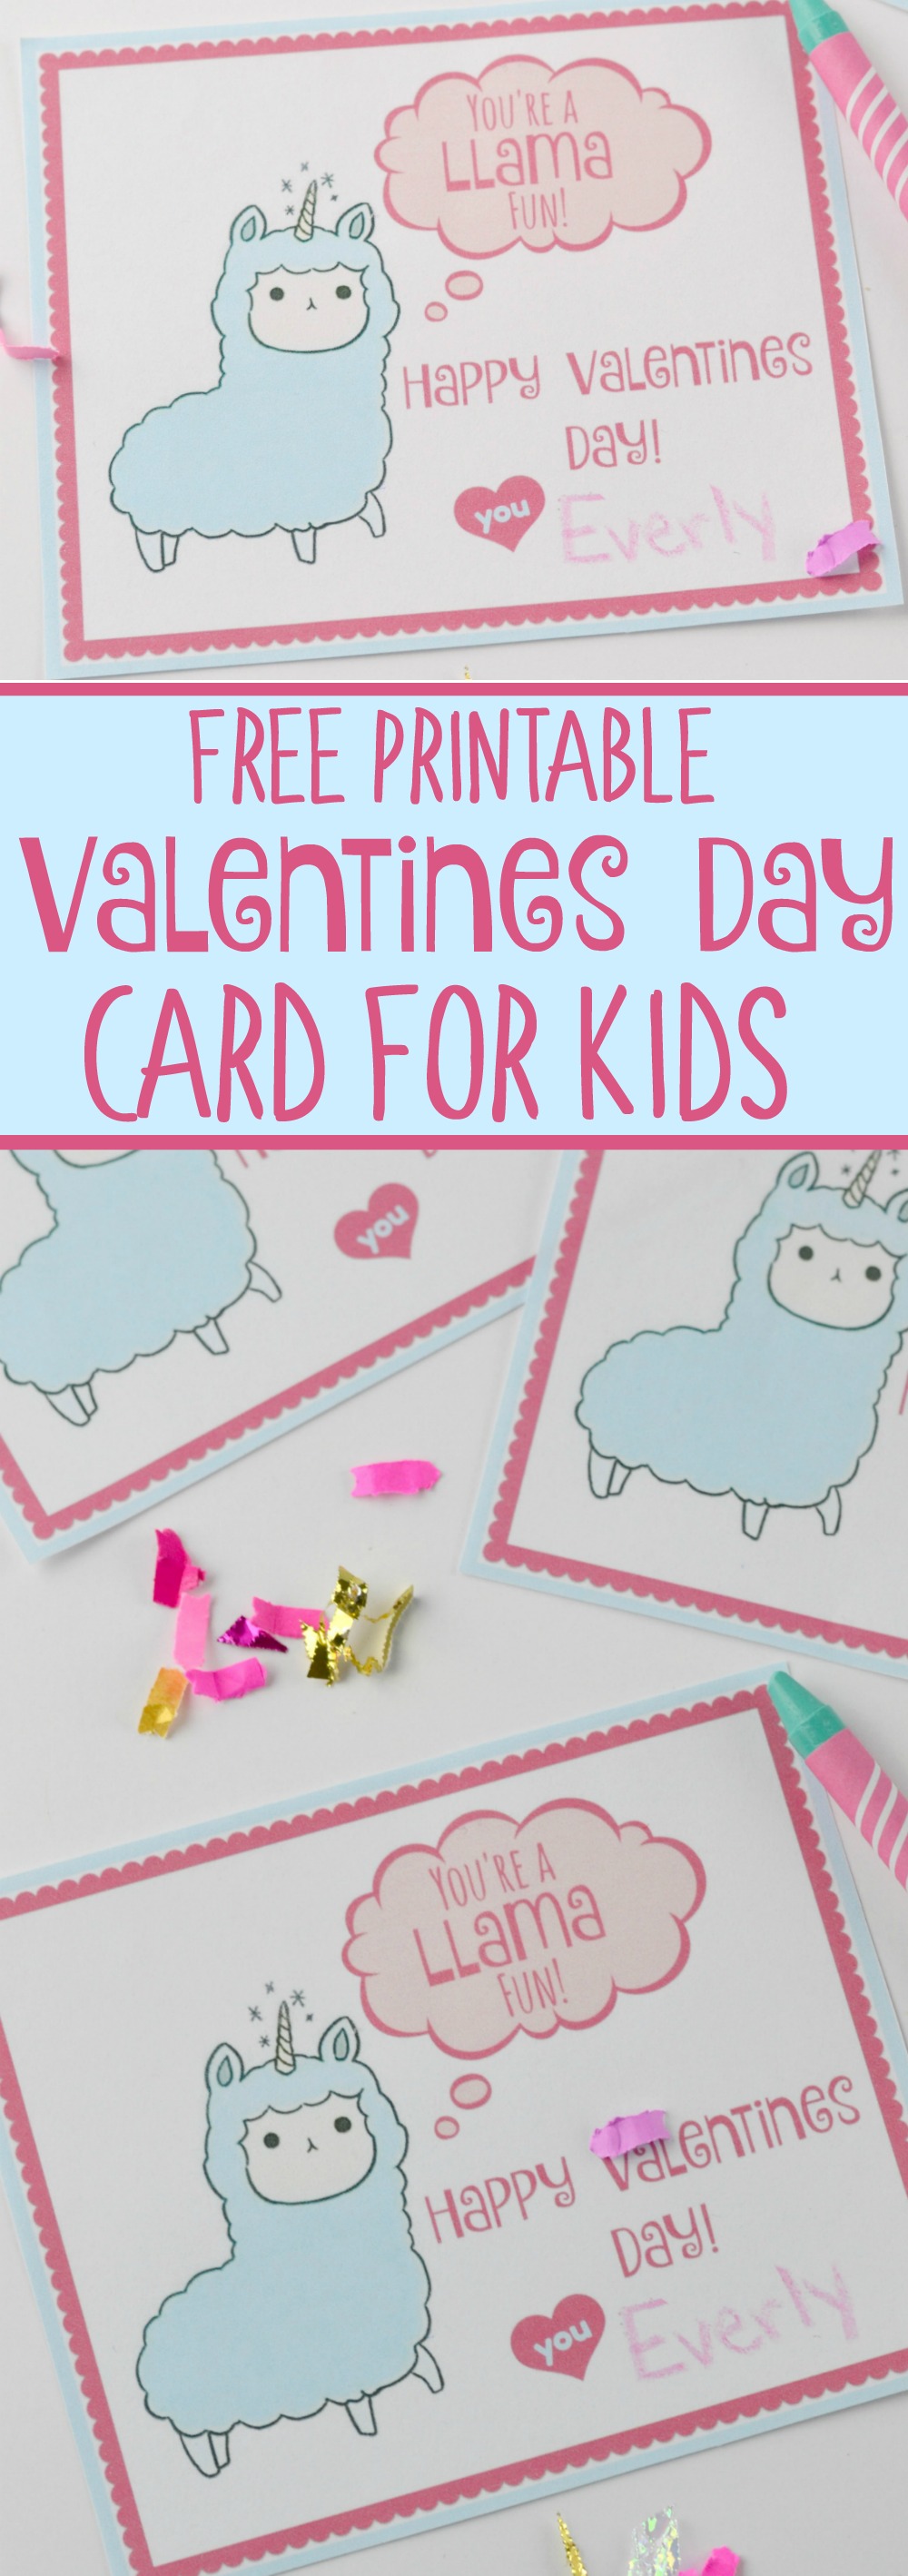 Free Printable Valentines Day Card for Kids #valentinesday #diyvalentine #diy #easy #valentine #kids #holiday